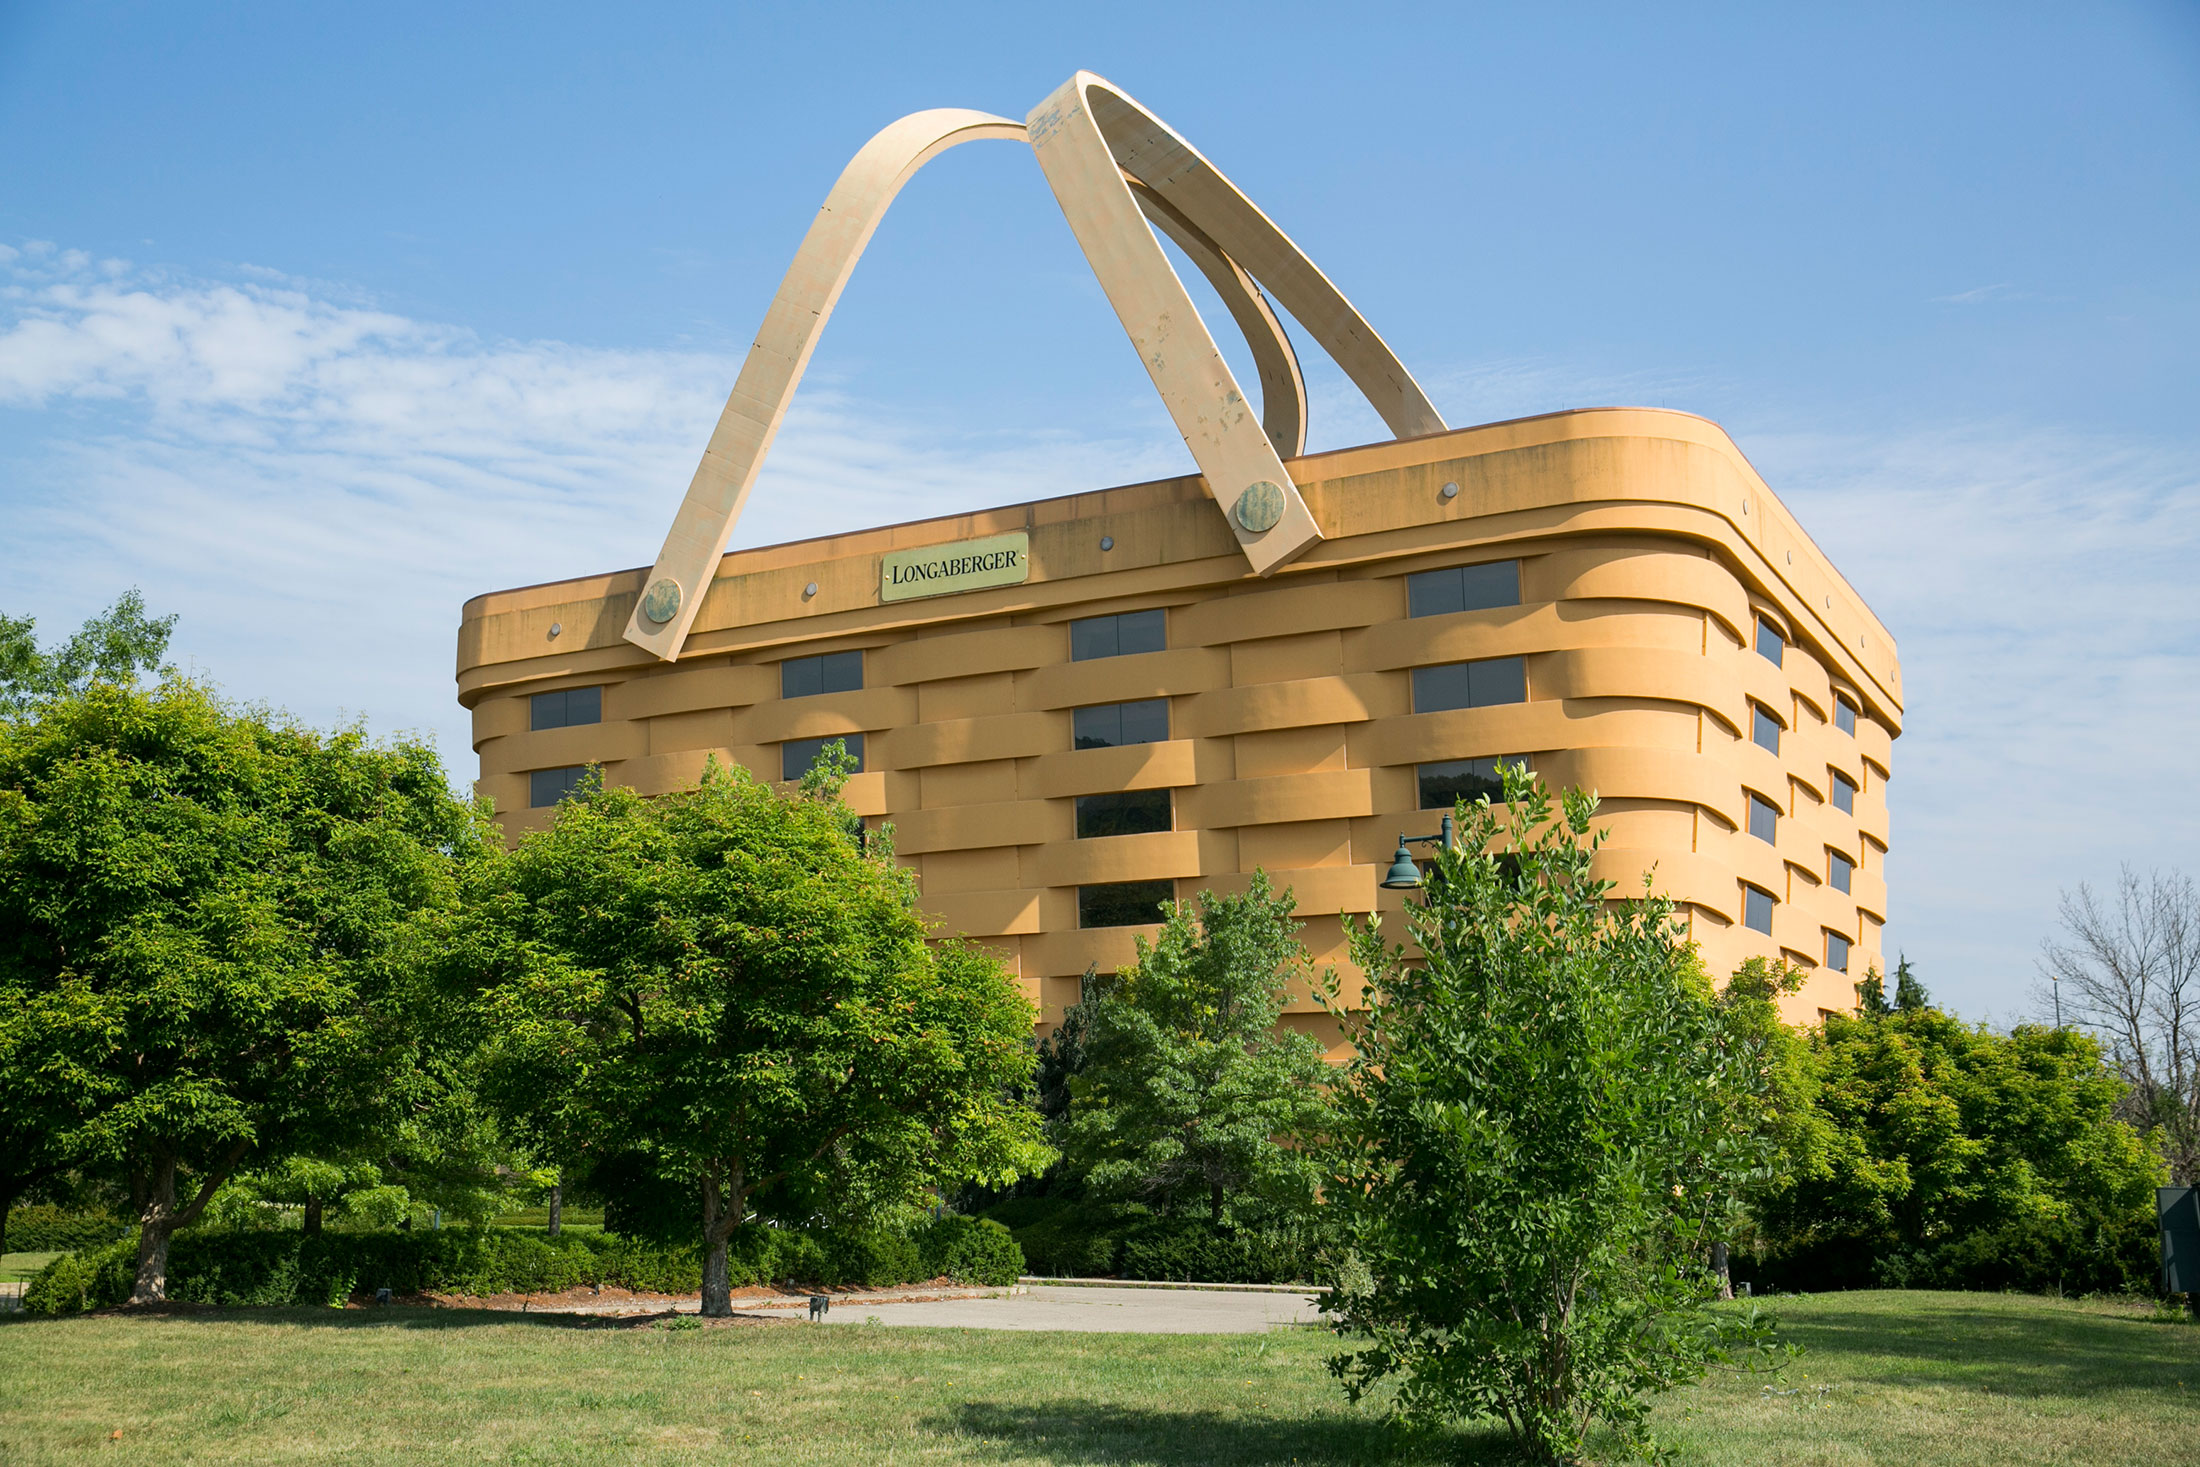 The former headquarters of the Longaberger Company in Newark, Ohio.
